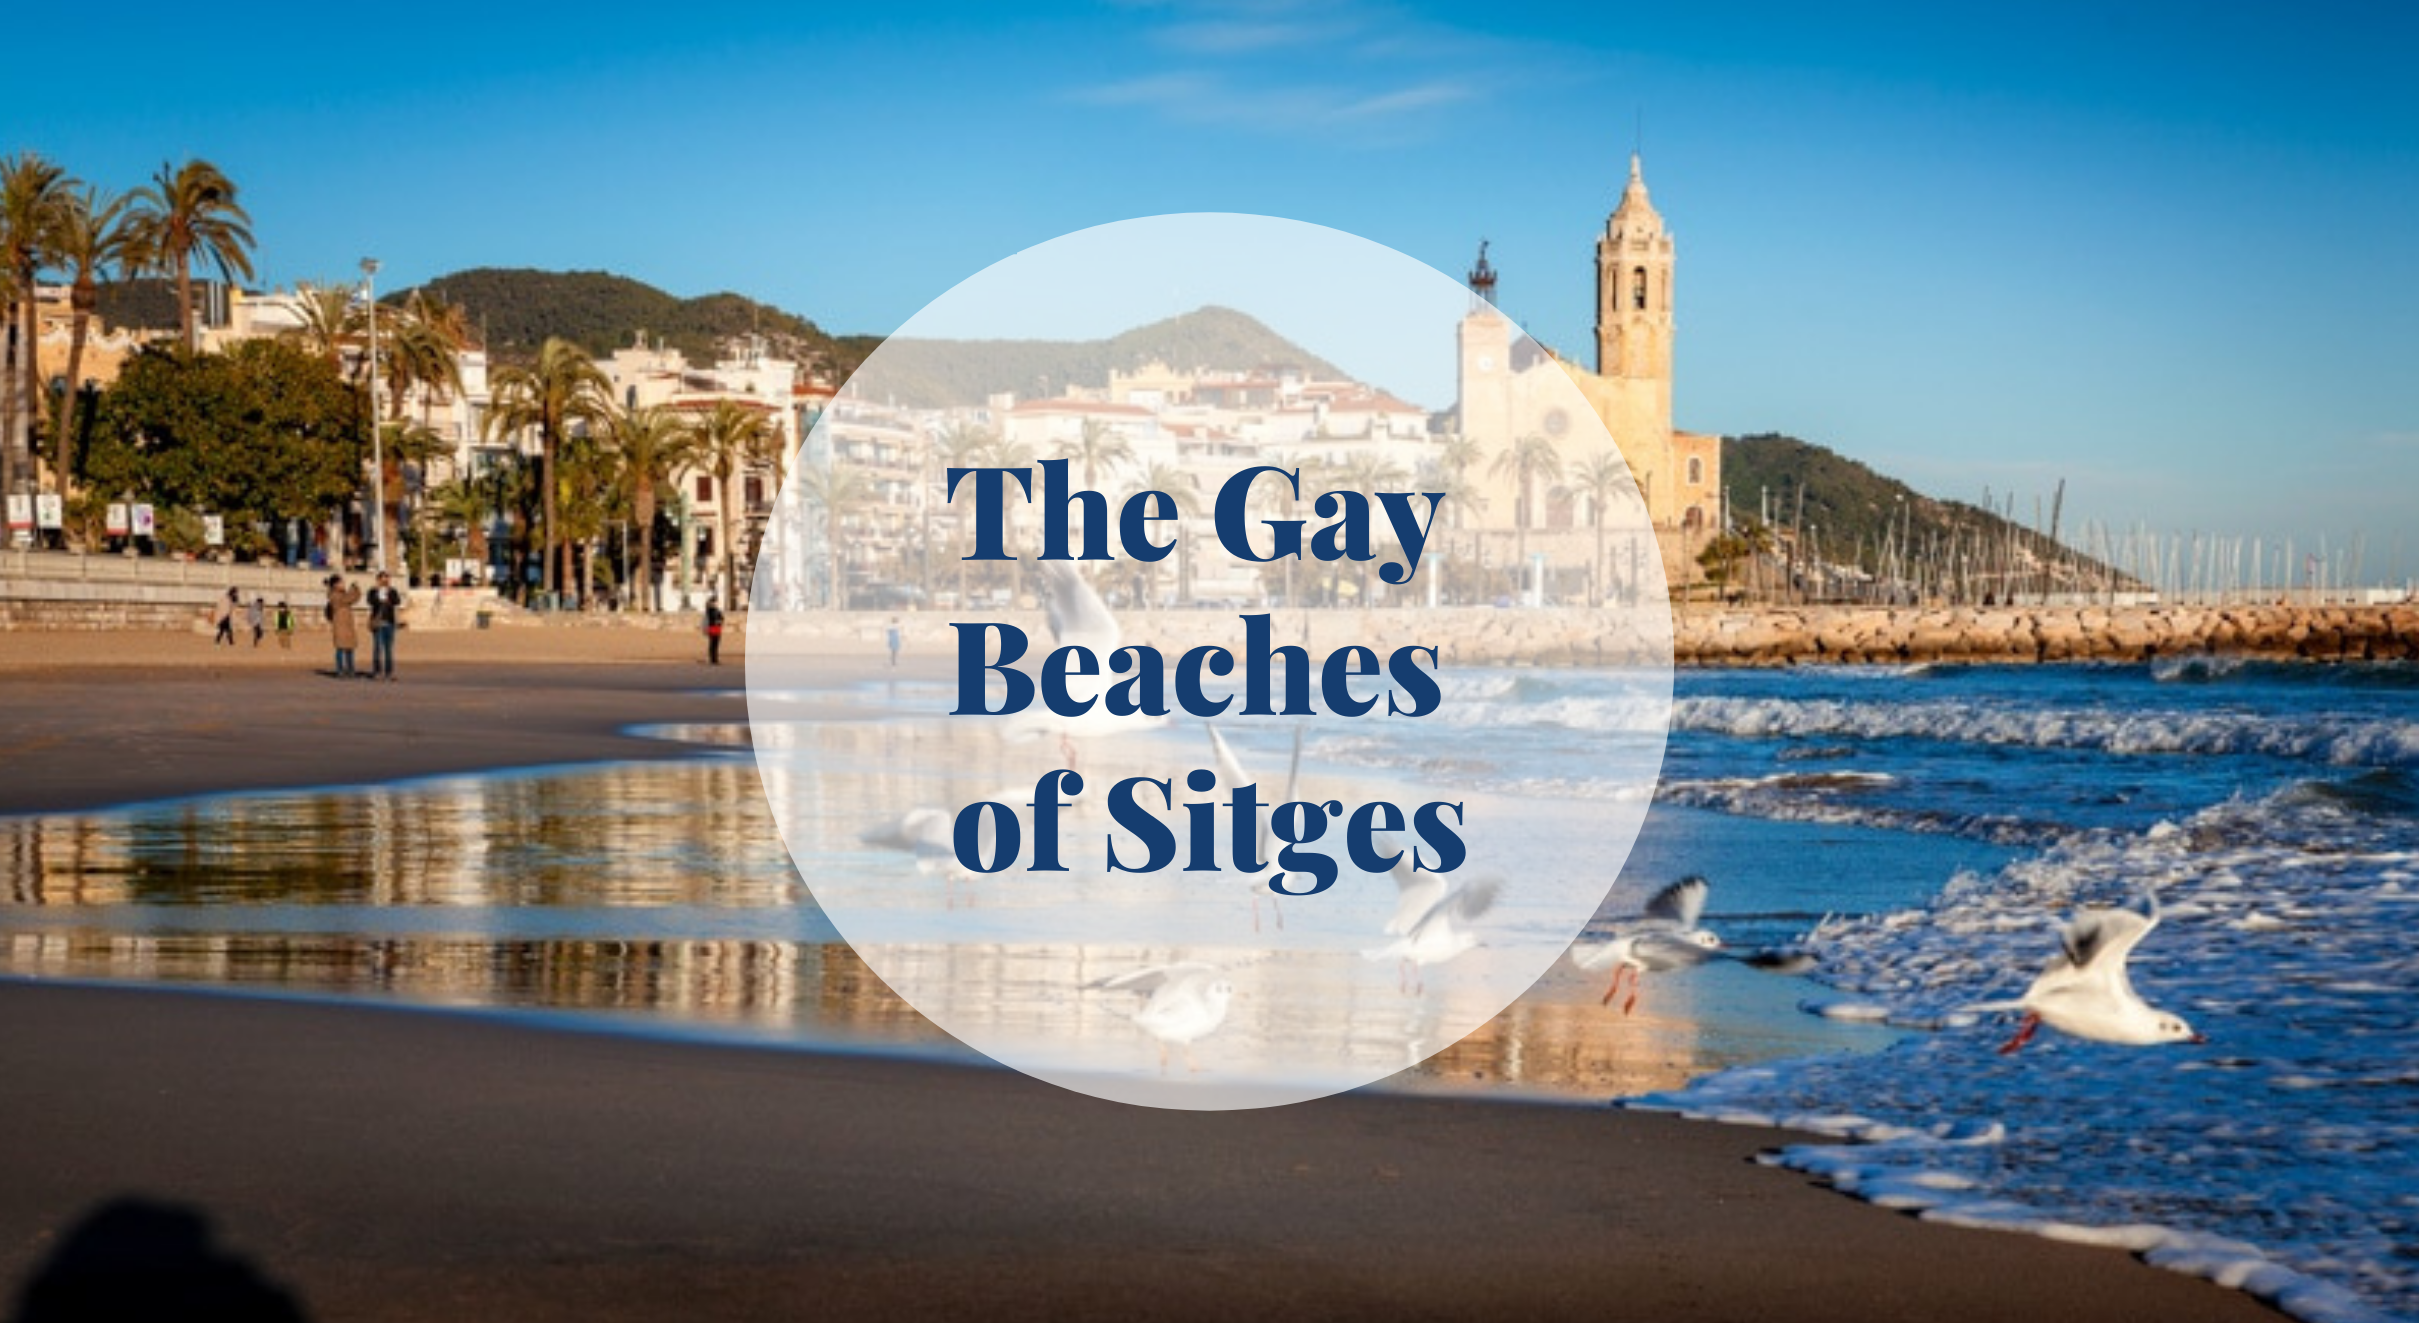 Lets discover the Gay Beaches of Sitges pic